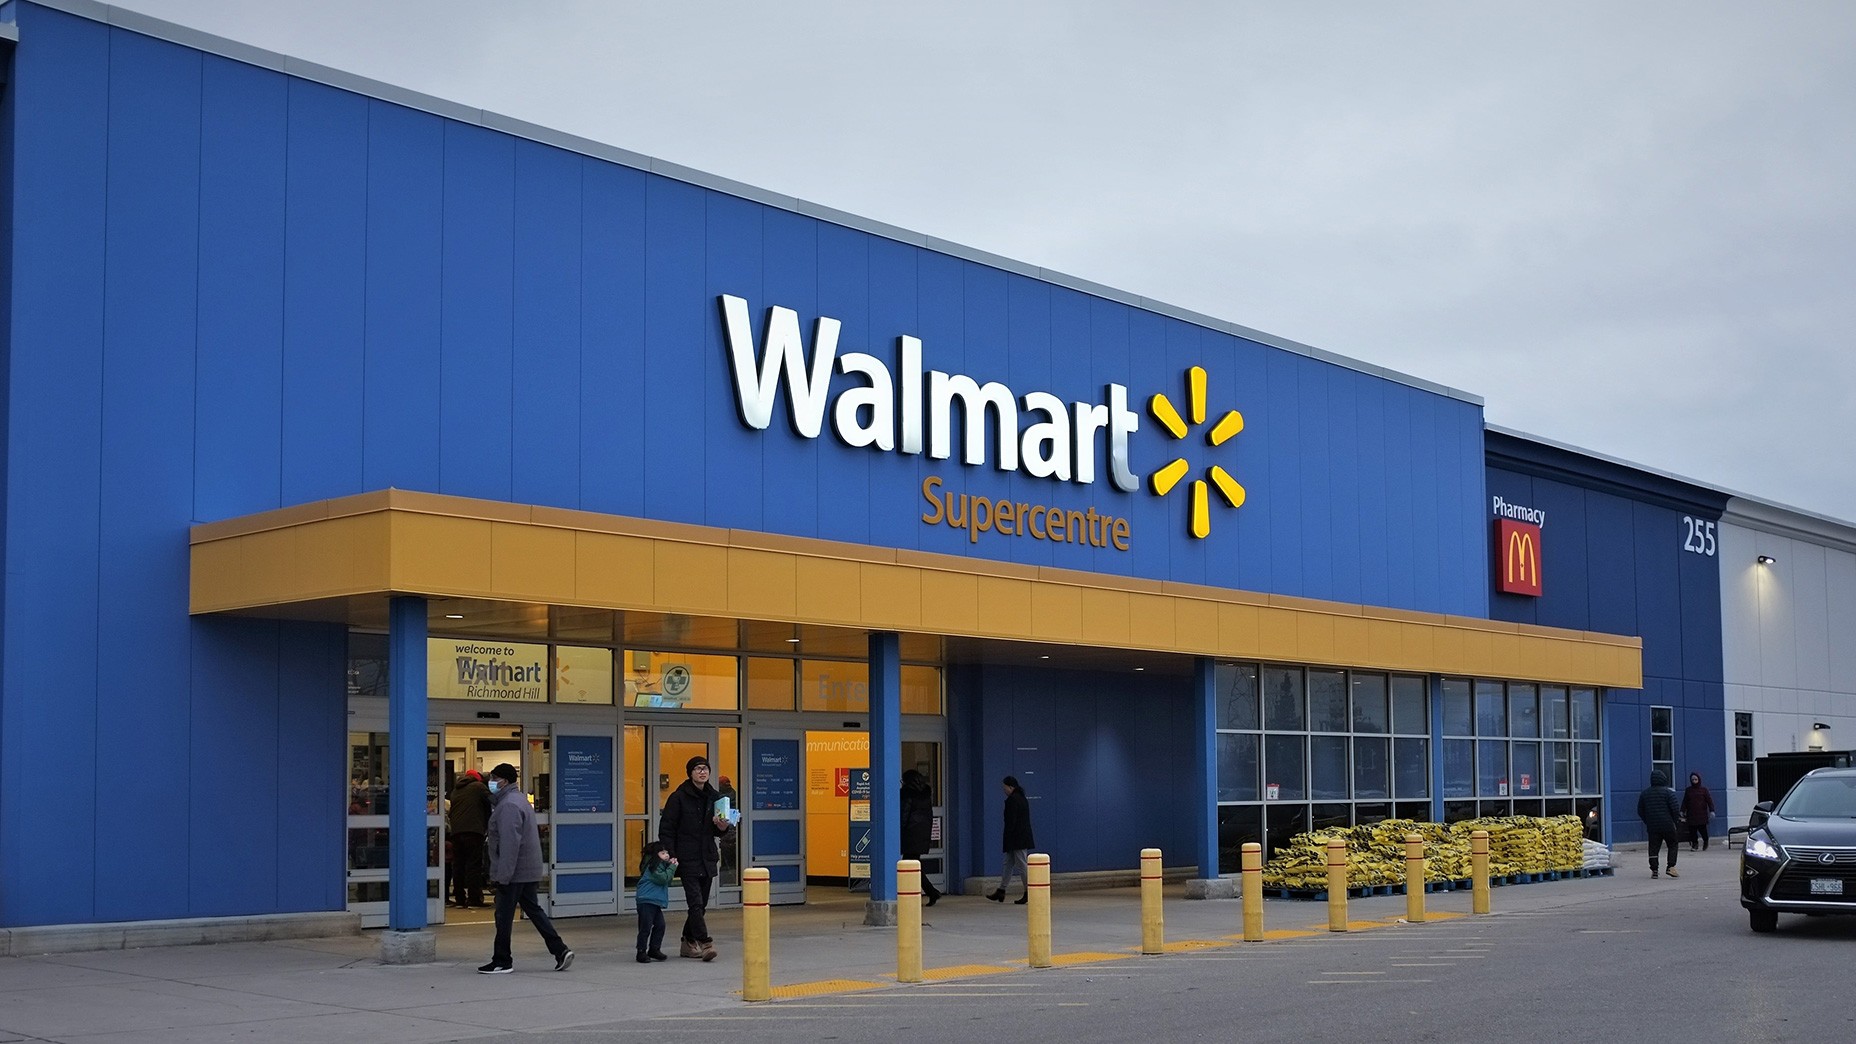 Walmart Stock Returns to All-Time Highs: Should We Expect Further Growth?